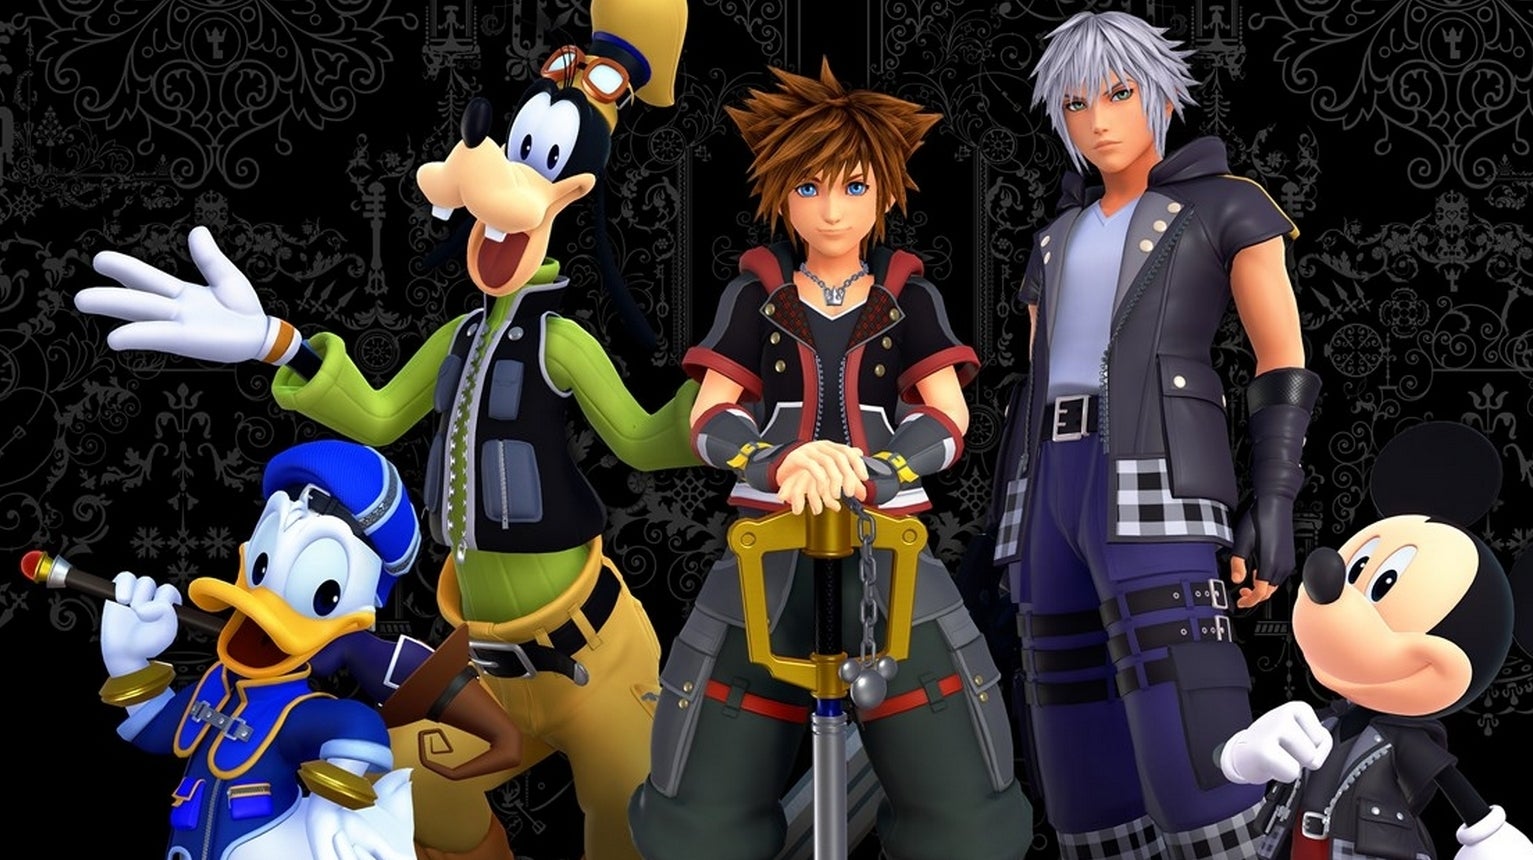 Image for June's Game Pass additions include Kingdom Hearts HD on Xbox One, BattleTech on PC